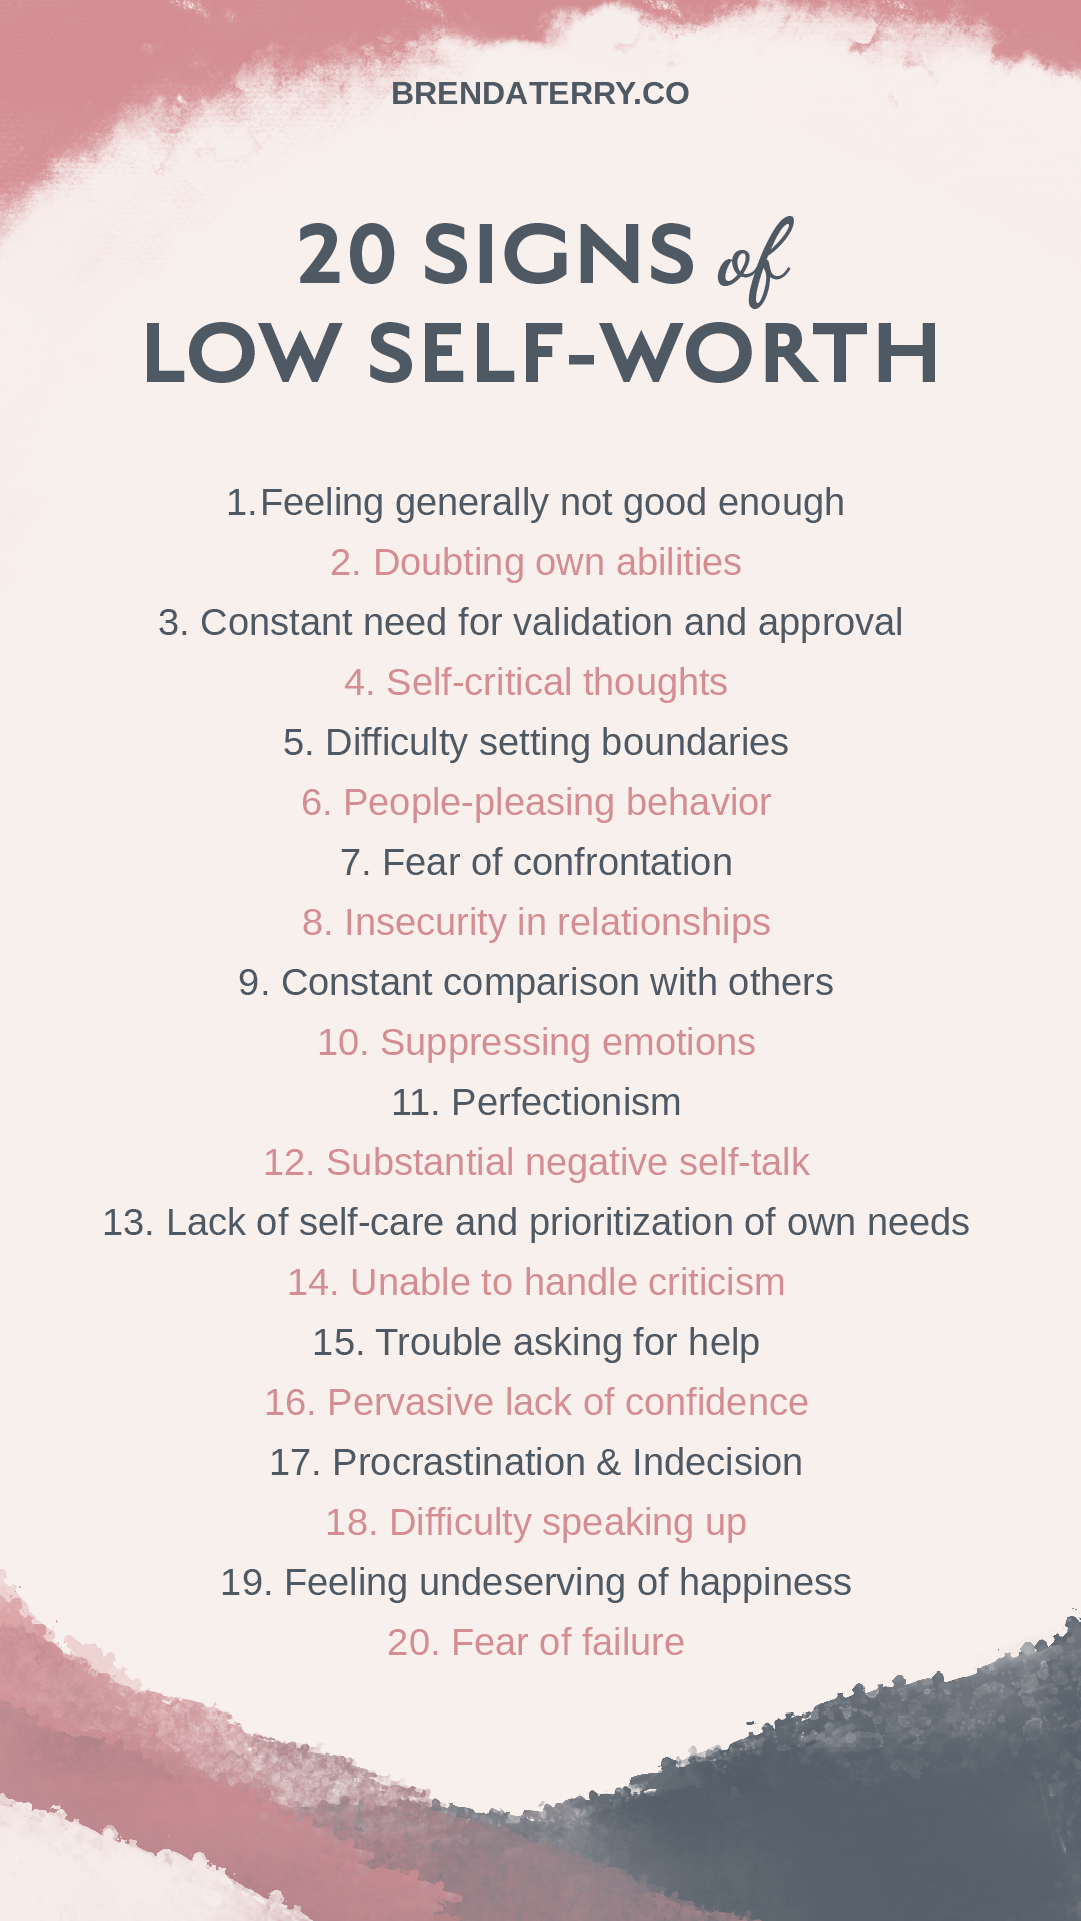 20 signs of low-self worth